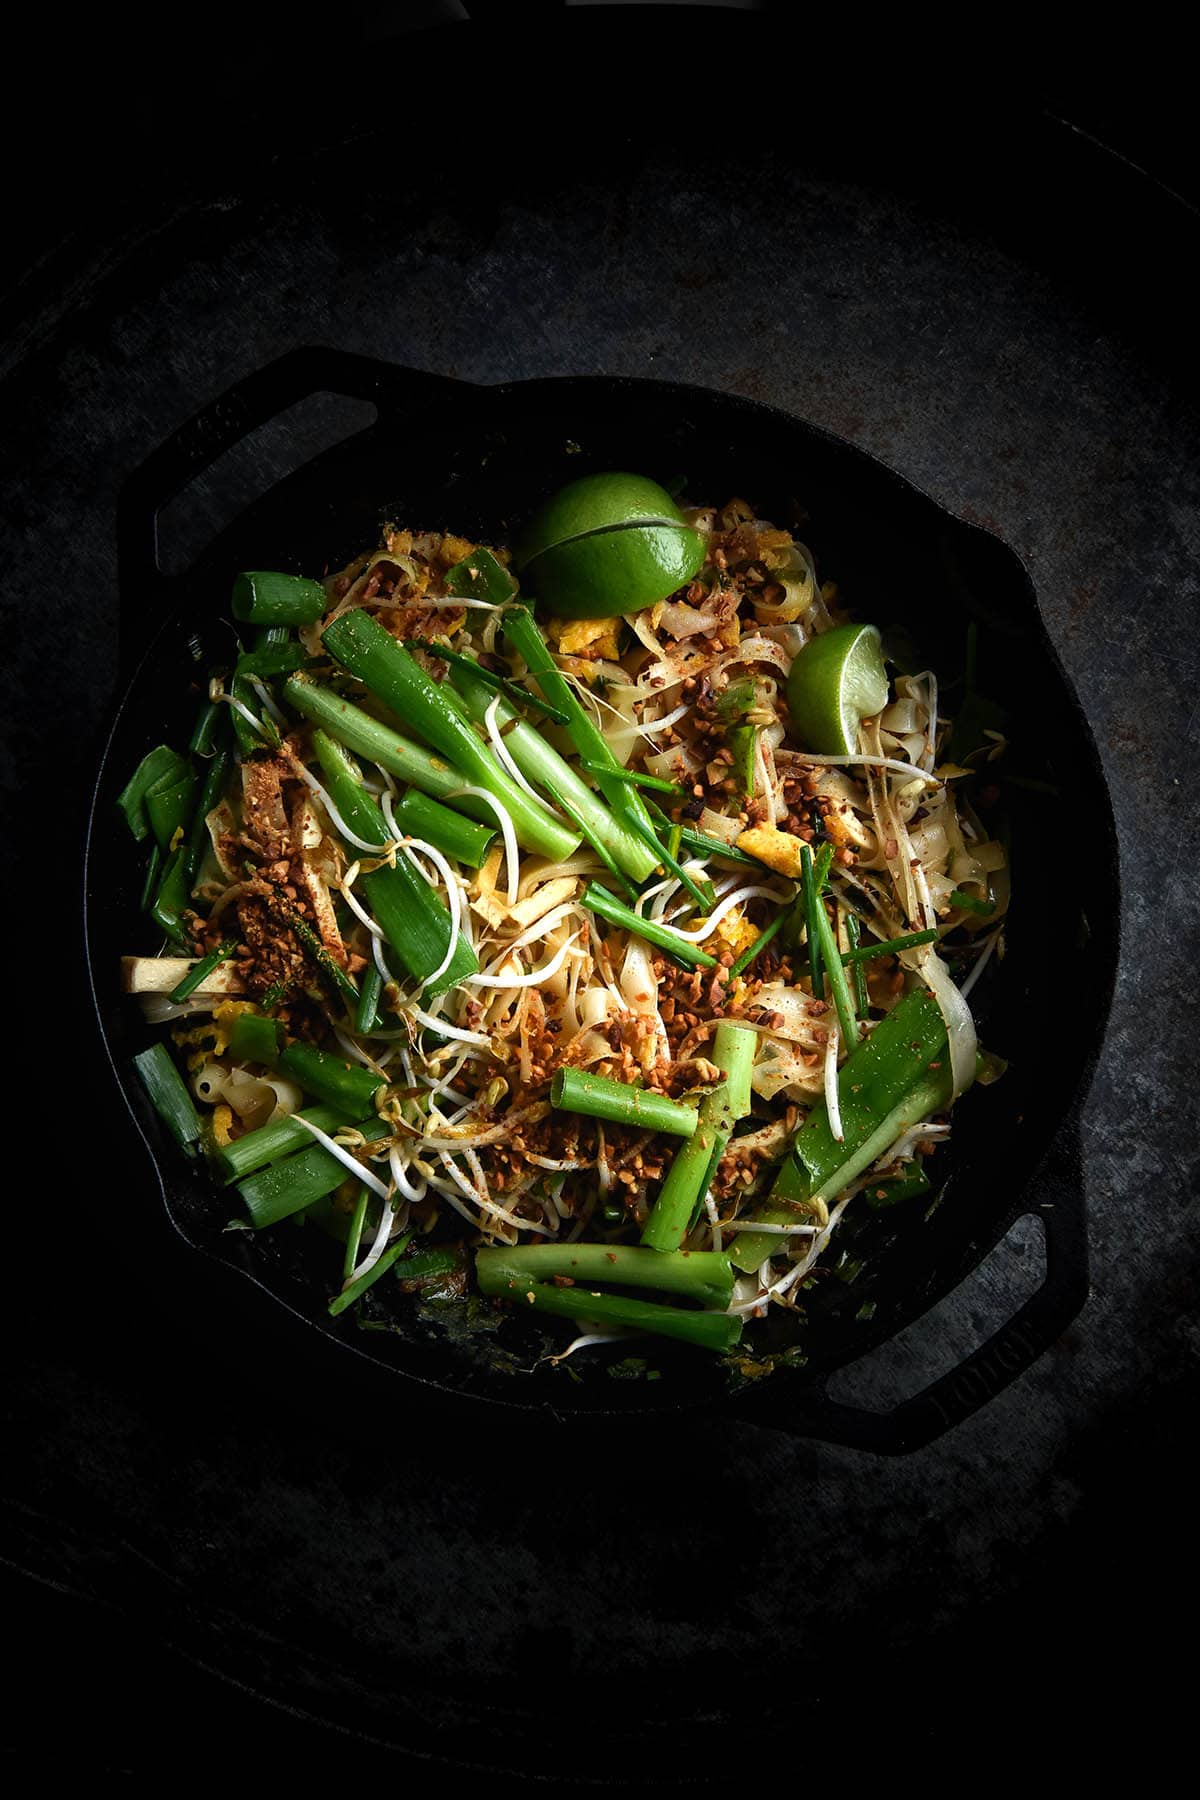 A dark and moody aerial view of a skillet of FODMAP friendly Pad Thai. The Pad Thai sits in the middle of the image and is topped with bean sprouts, spring onion greens, toasted peanuts and lime wedges